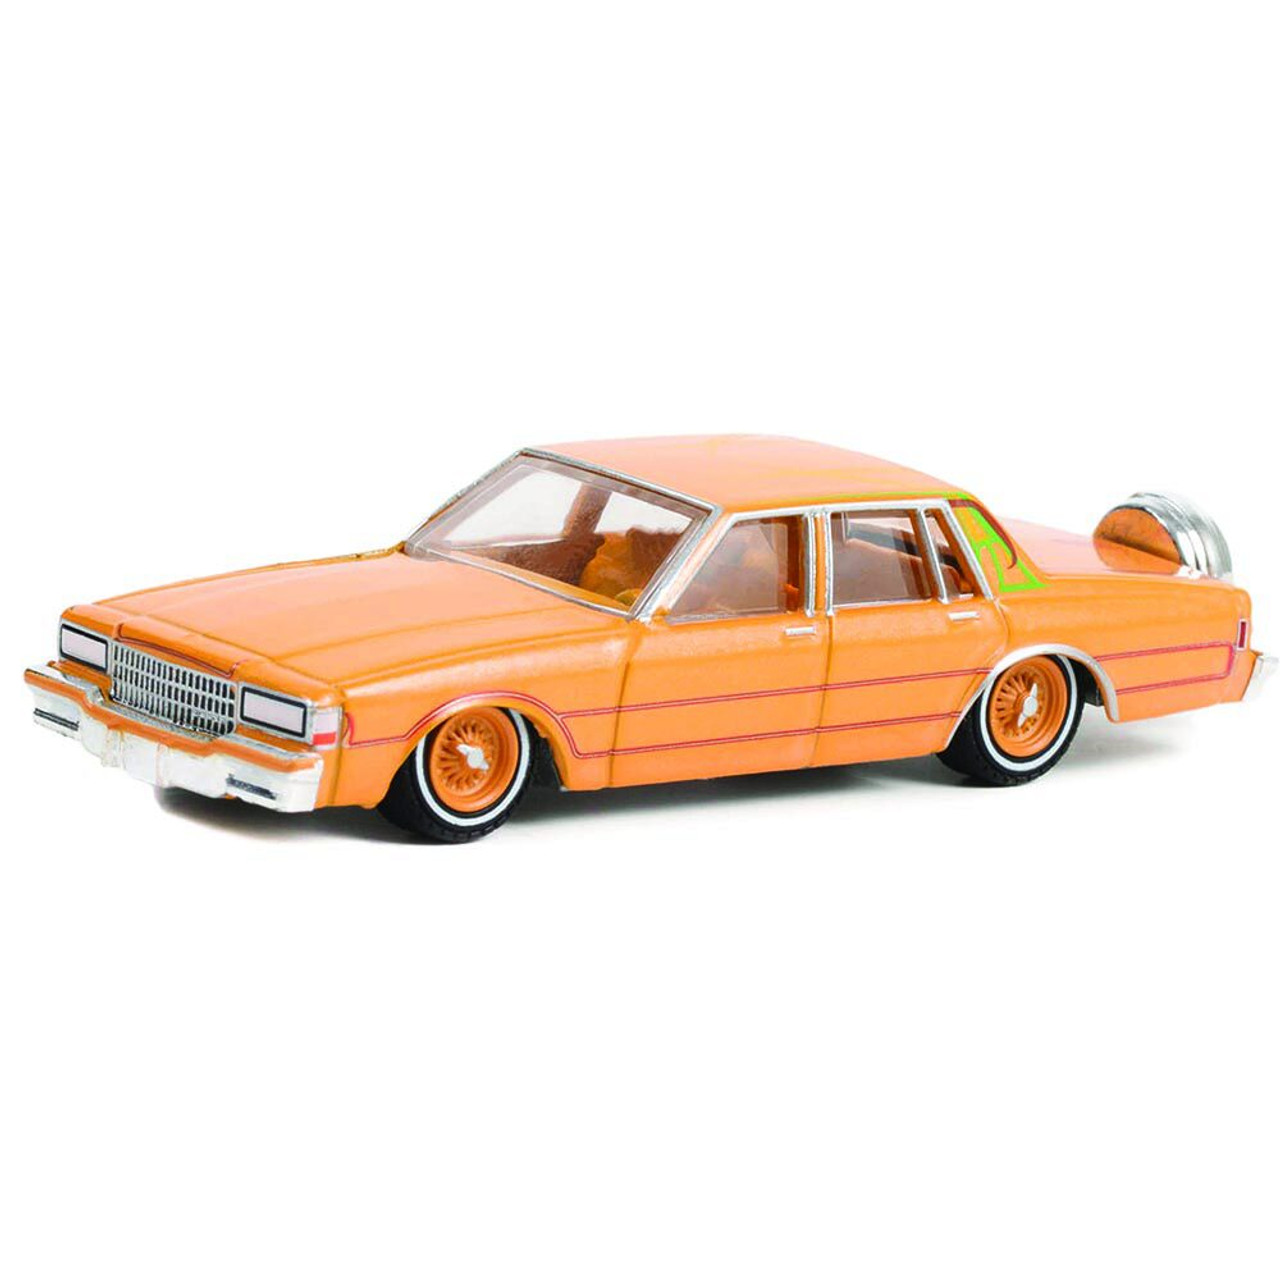 Onheil klimaat backup 1990 Chevrolet Caprice Classic with Continental Kit - Custom Kandy Orange  1:64 Scale | Collectable Diecast